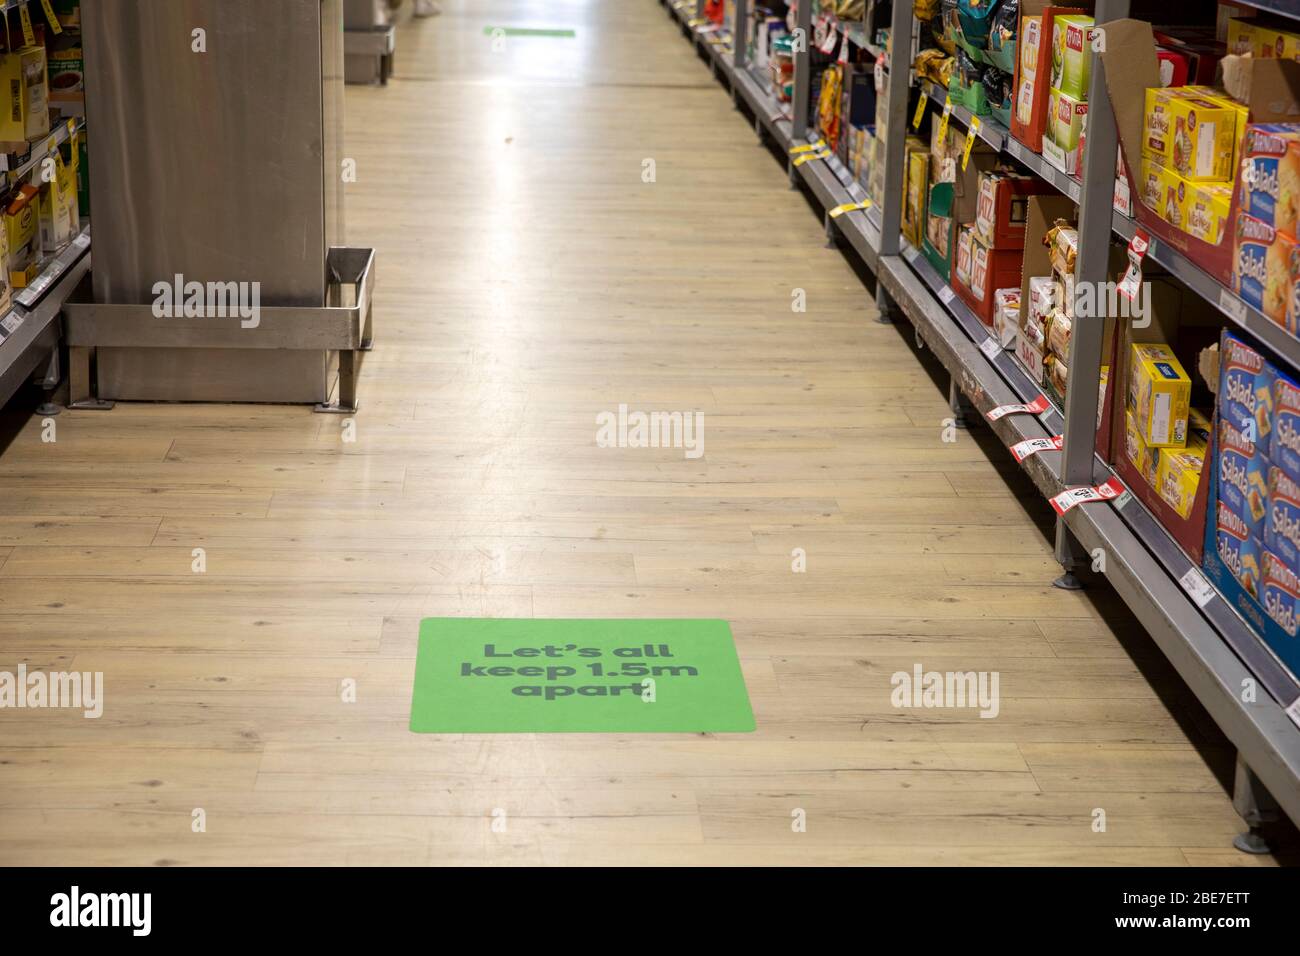 Social distancing reinforced in australian supermarket with floor sign saying lets all keep 1.5m apart Stock Photo